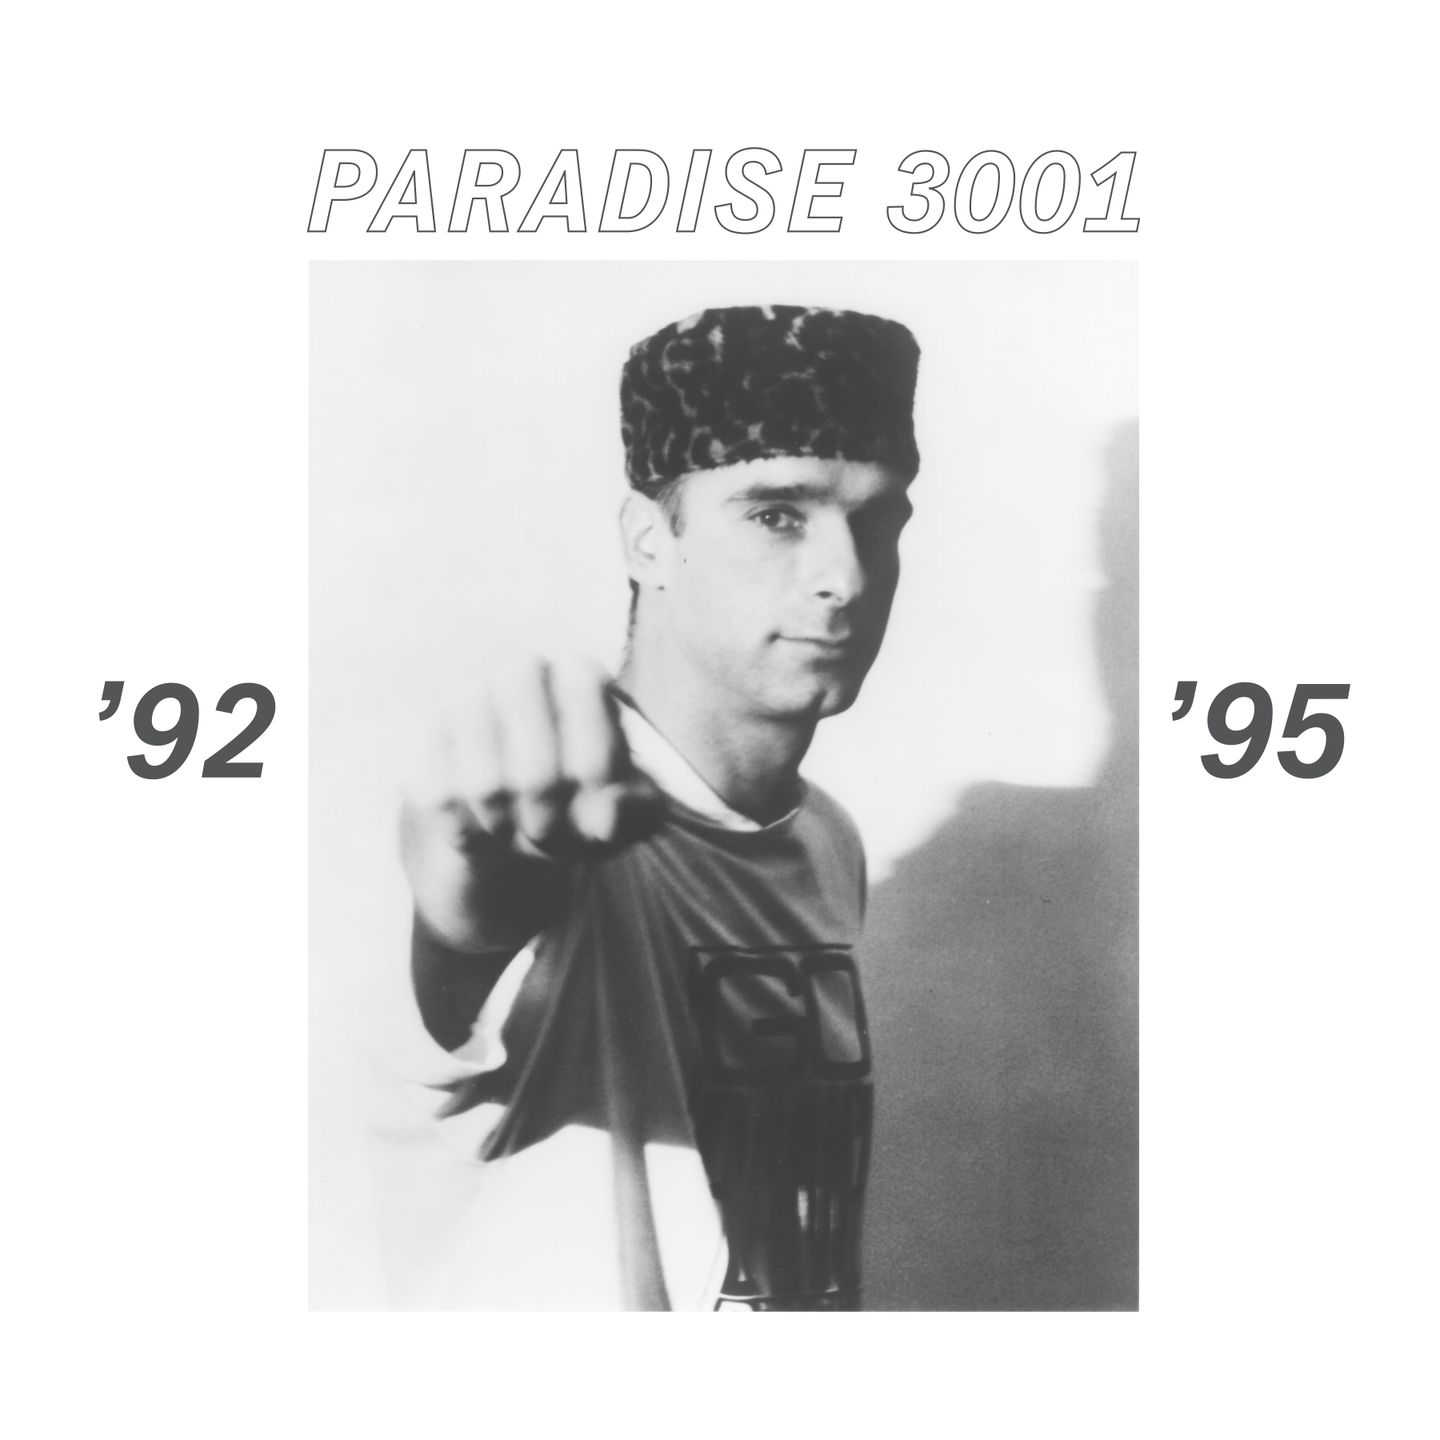 Paradise 3001 - Selected works from between 1992 and 1995 - SMR008 - SOUND METAPHORS RECORDS